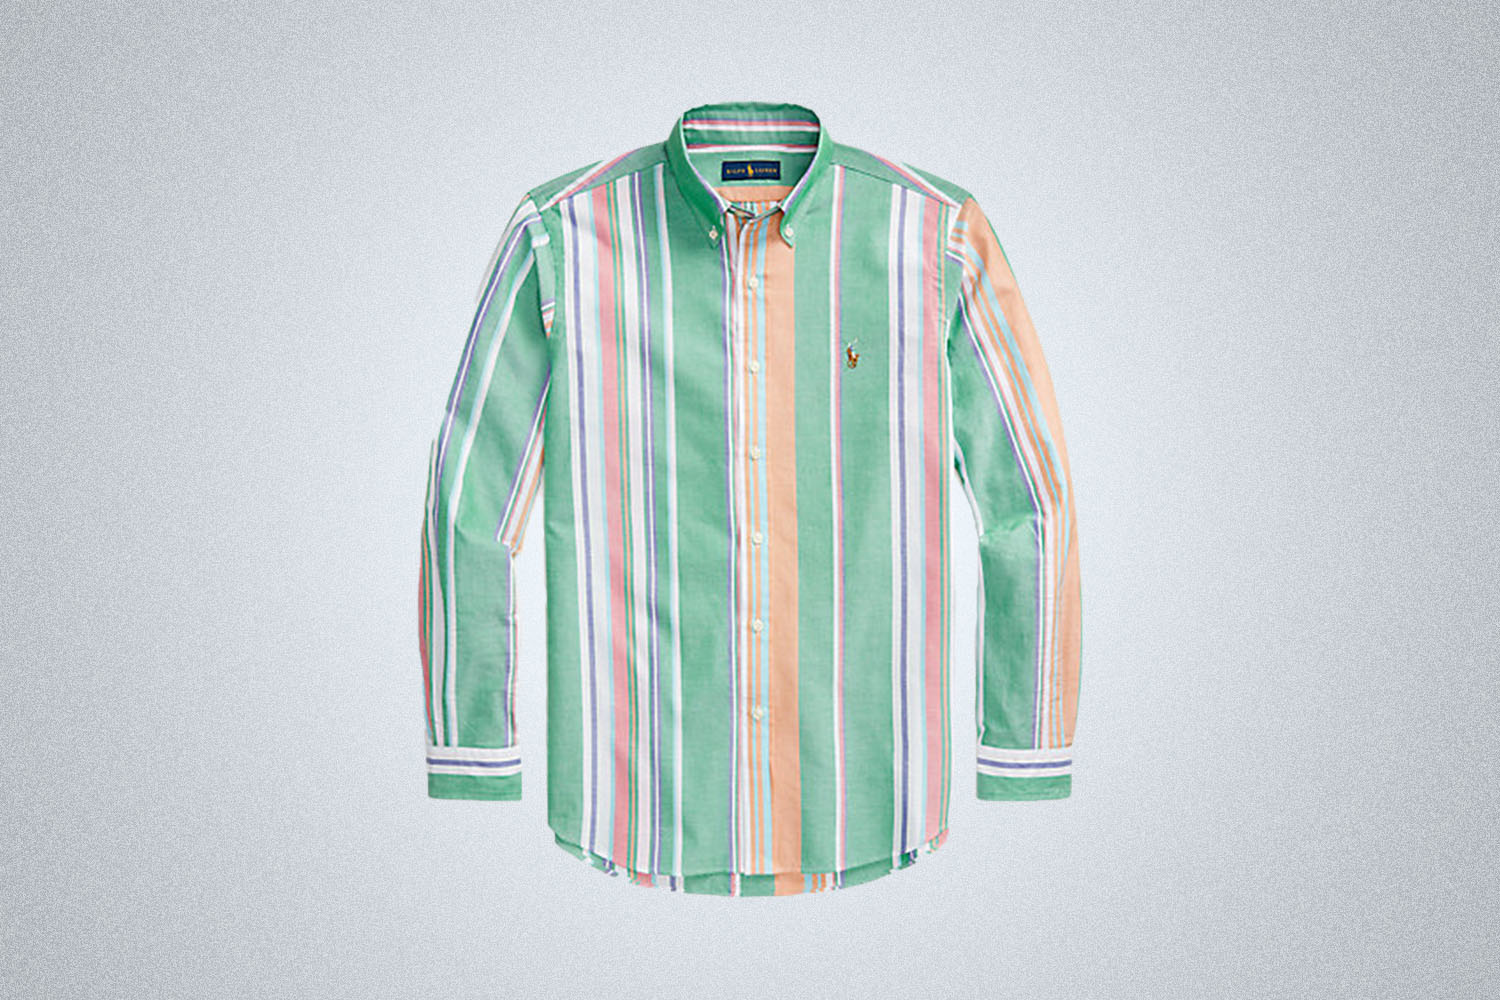 a white, yellow, pink and green striped shirt from Ralph Lauren on a grey background